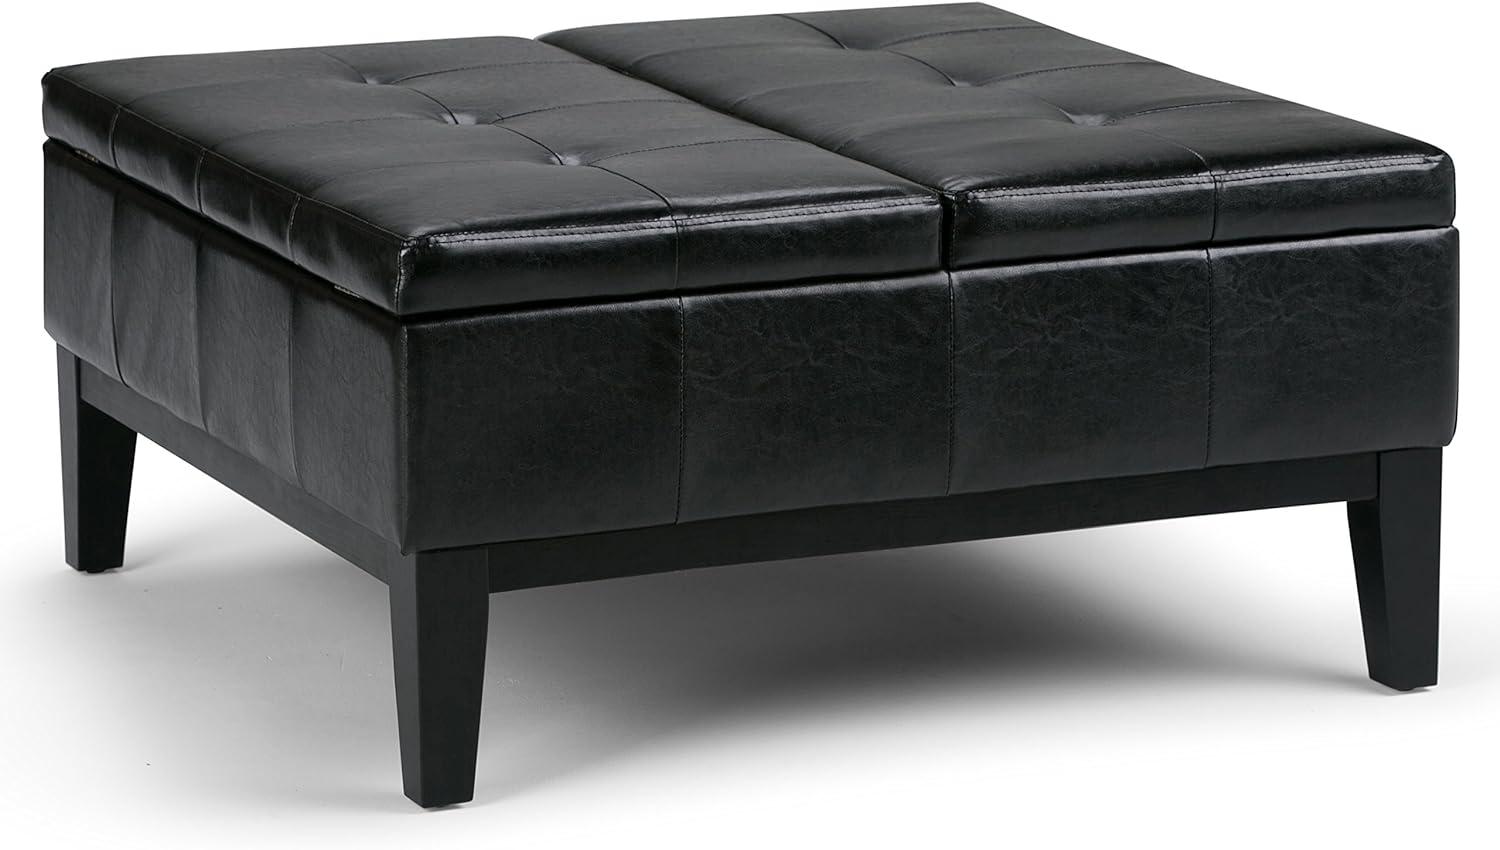 Midnight Black Tufted Faux Leather Cocktail Storage Ottoman